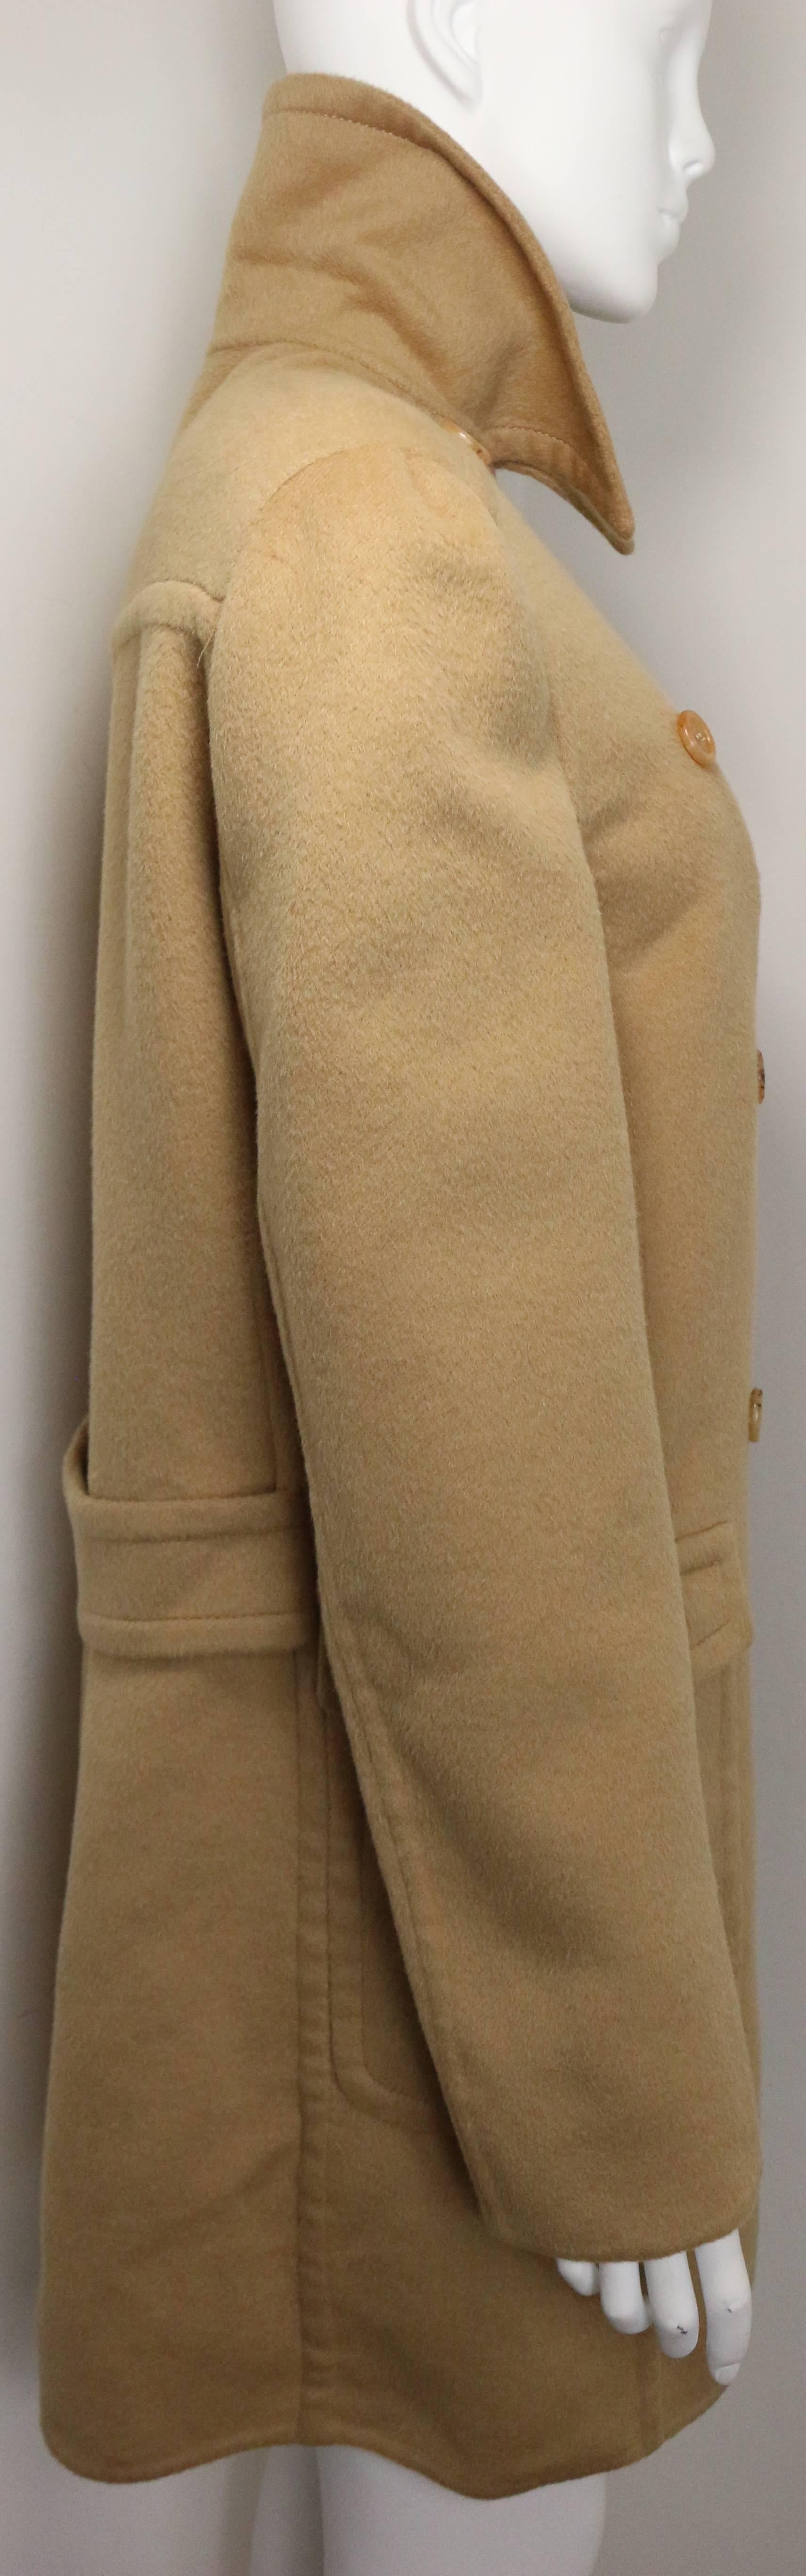 Prada Camel Wool Angora Goat Hair Double Breasted Coat  For Sale 1